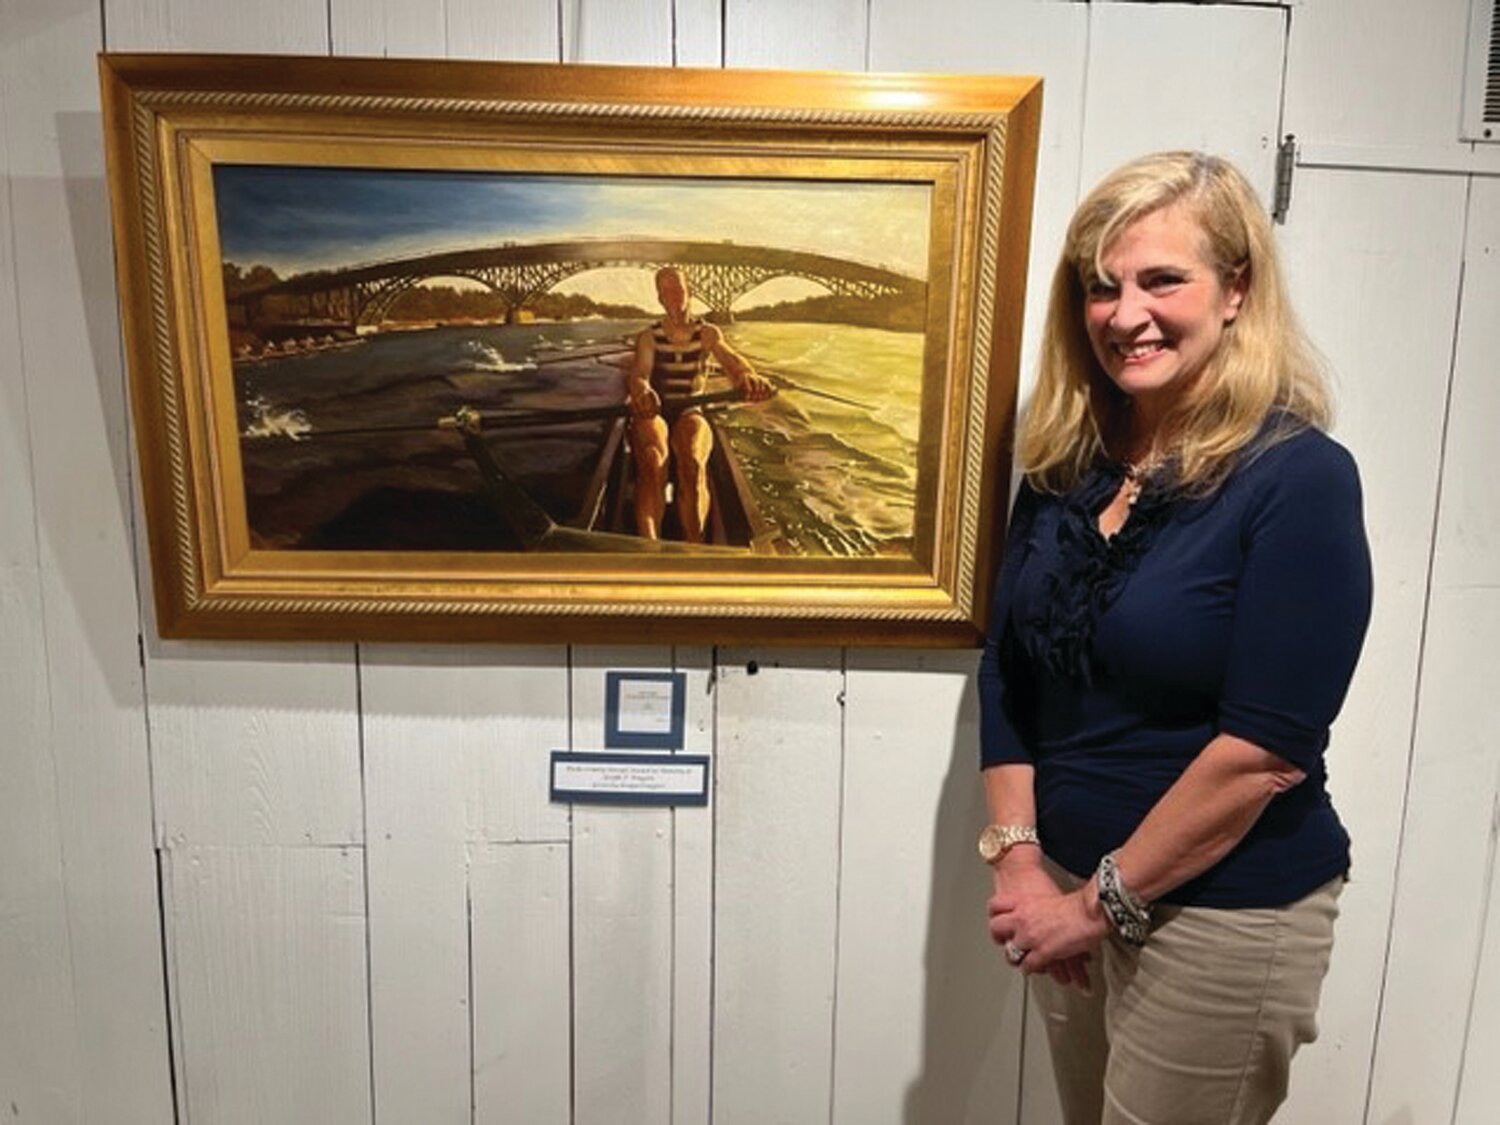 Kate Quinn Wright poses with her oil painting, “Fall Rowing on the Schuylkill.” She won the Bucks County Herald Award at the Phillips Mill Art Show.